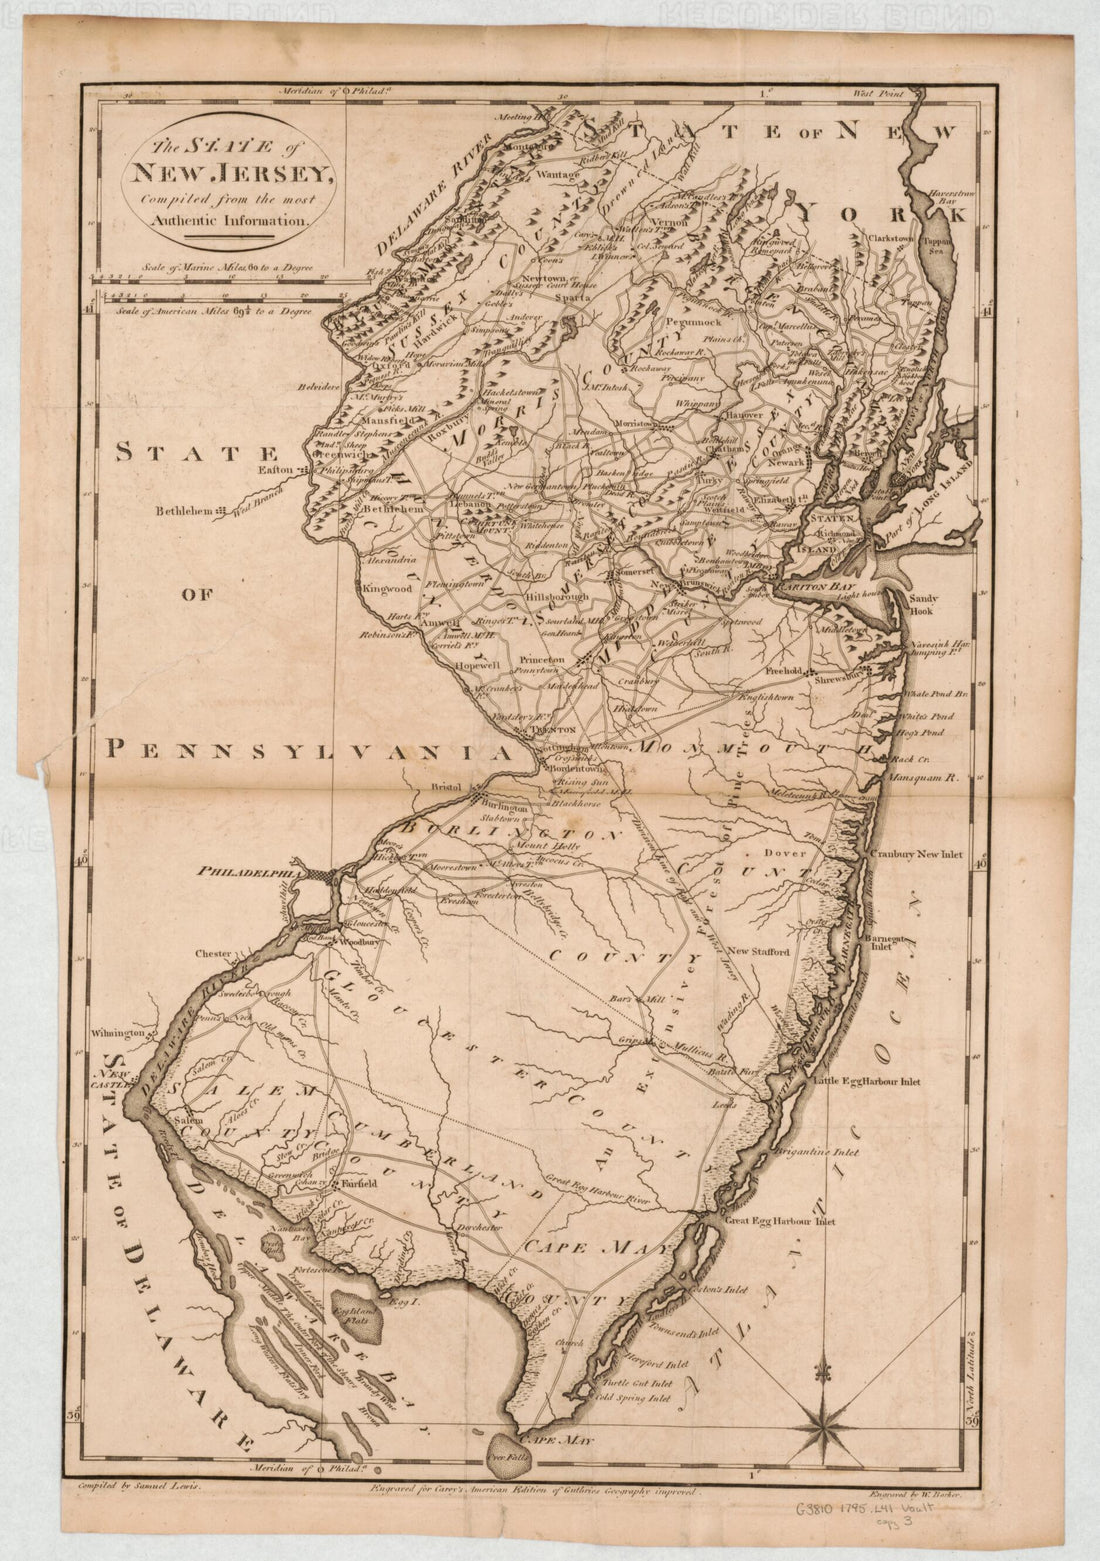 This old map of The State of New Jersey, Compiled from the Most Authentic Information from 1795 was created by W. (William) Barker, Mathew Carey, William Guthrie, Samuel Lewis in 1795